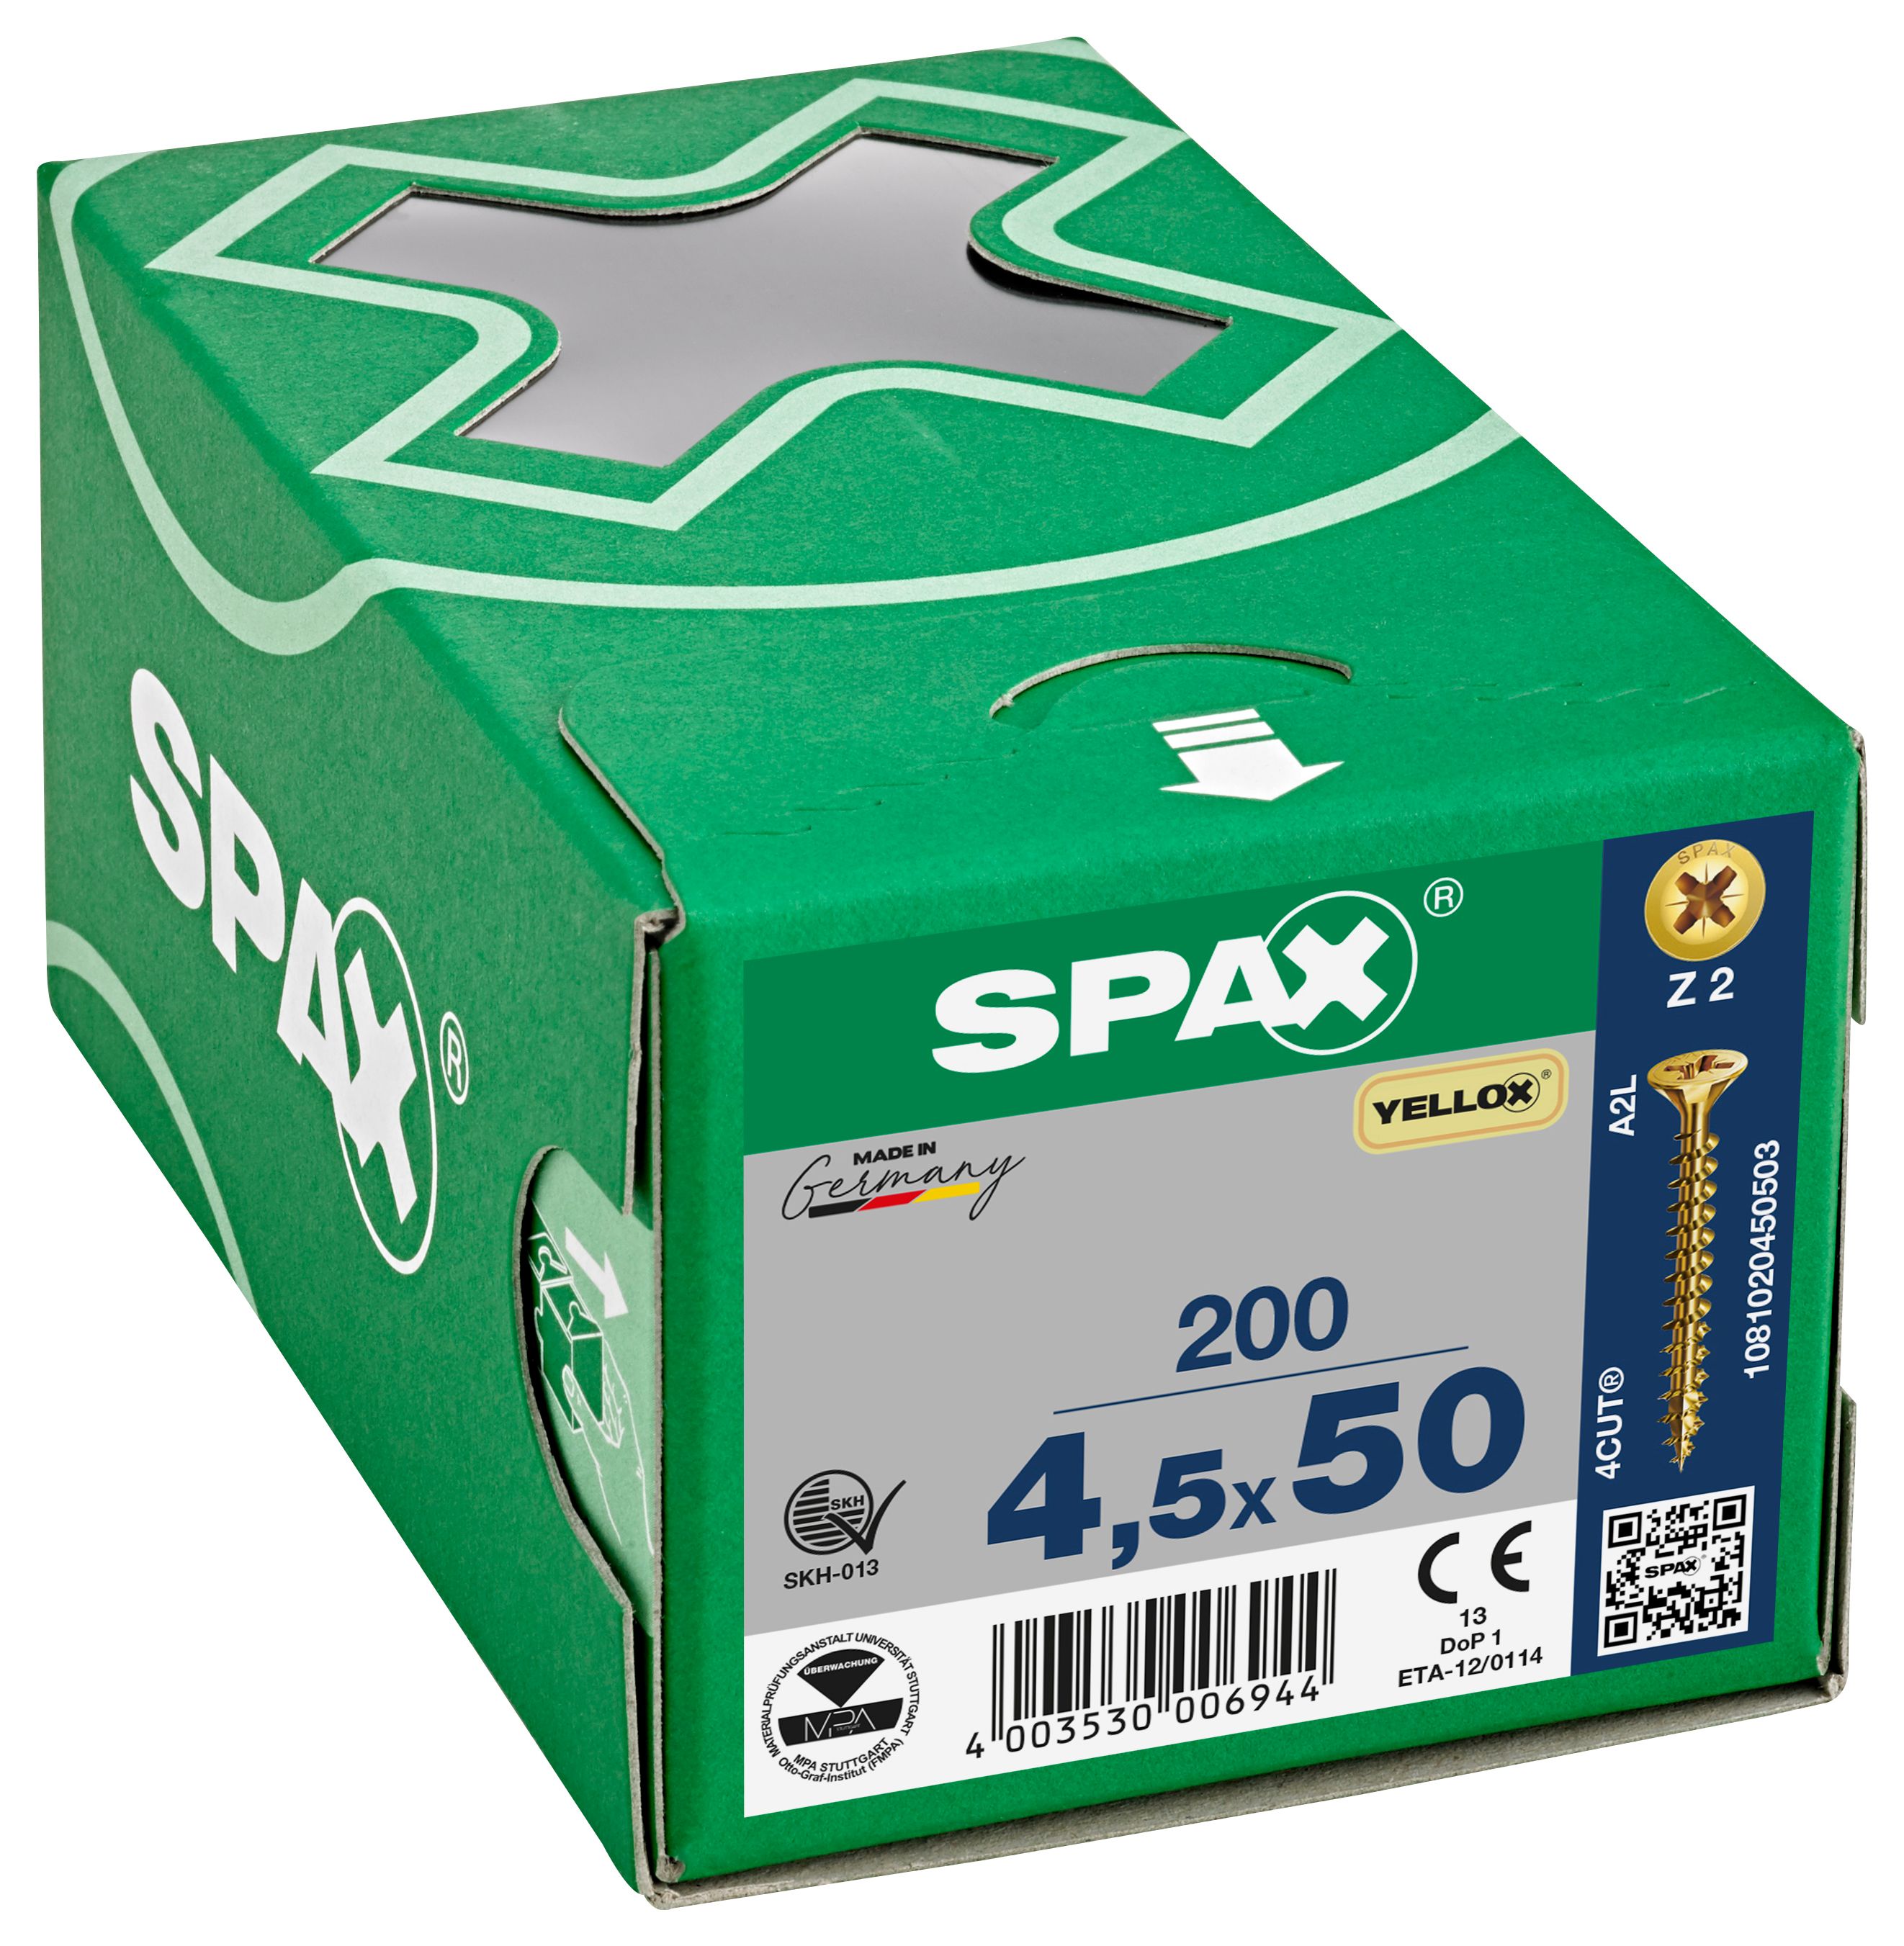 Image of Spax Pz Countersunk Yellox Screws - 4.5x50mm Pack Of 200